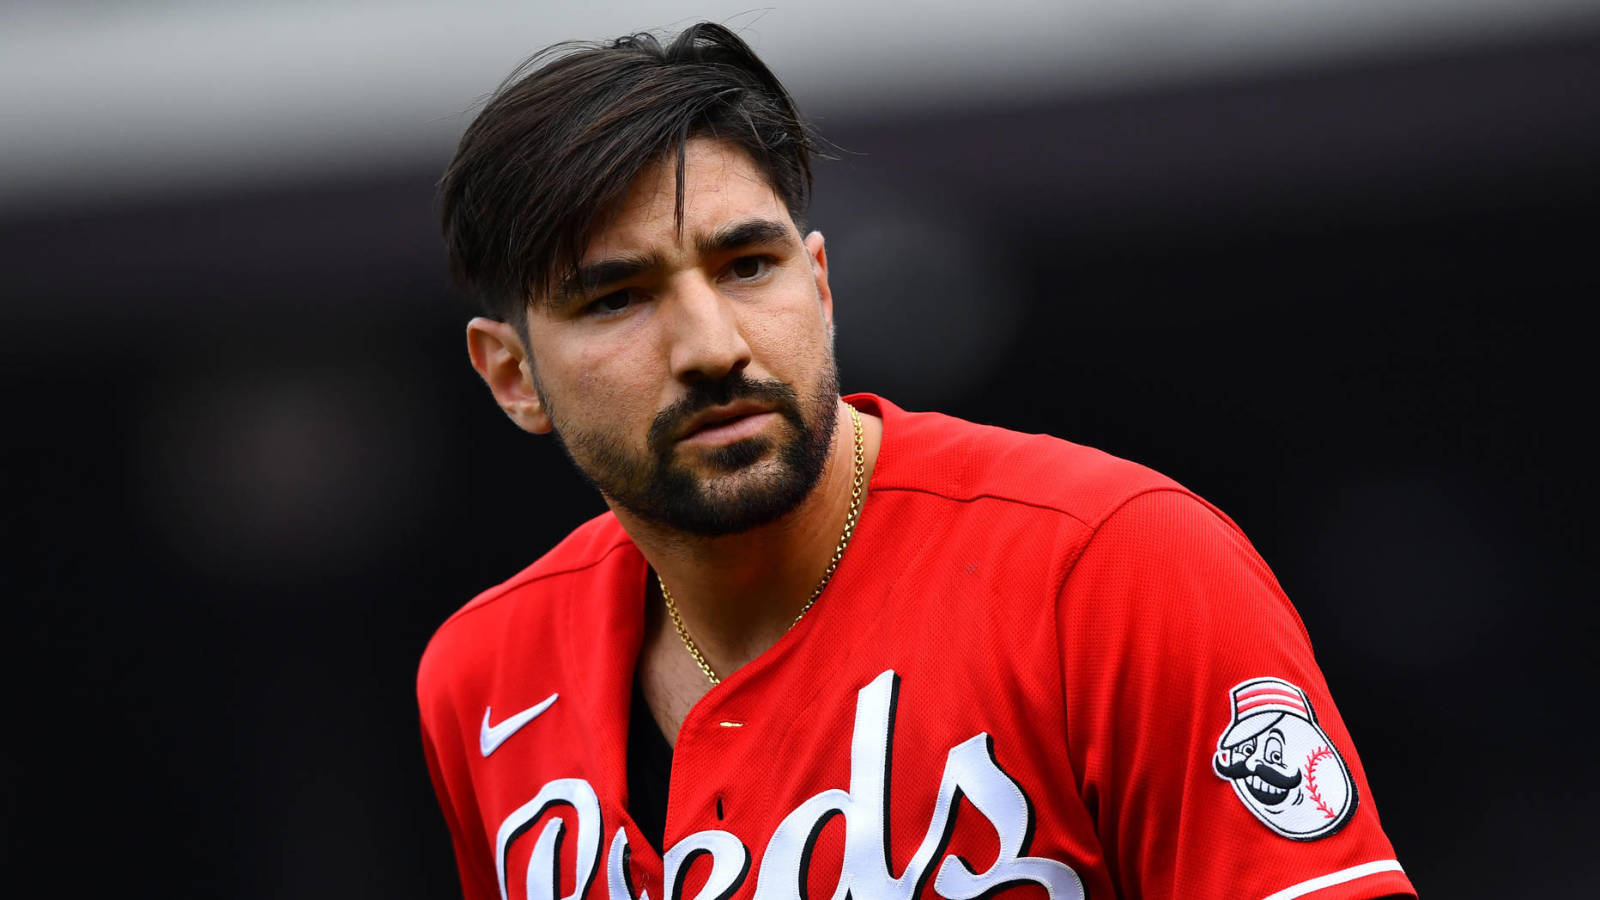 Nick Castellanos likely to opt out of deal with Reds